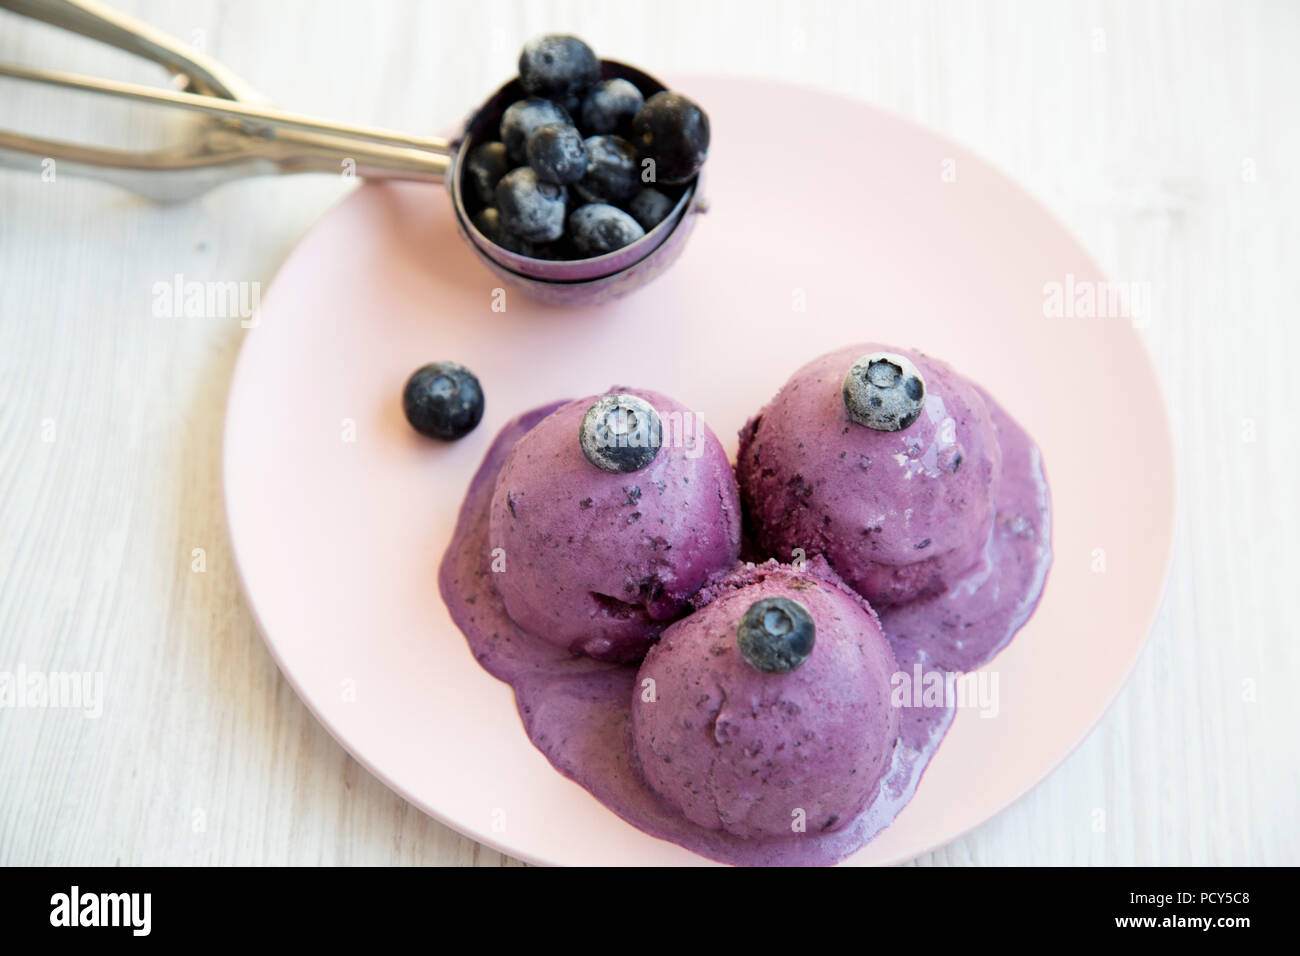 Blueberry ice cream balls with icecream scoop on a pink plate over white wooden suface, closeup. Stock Photo